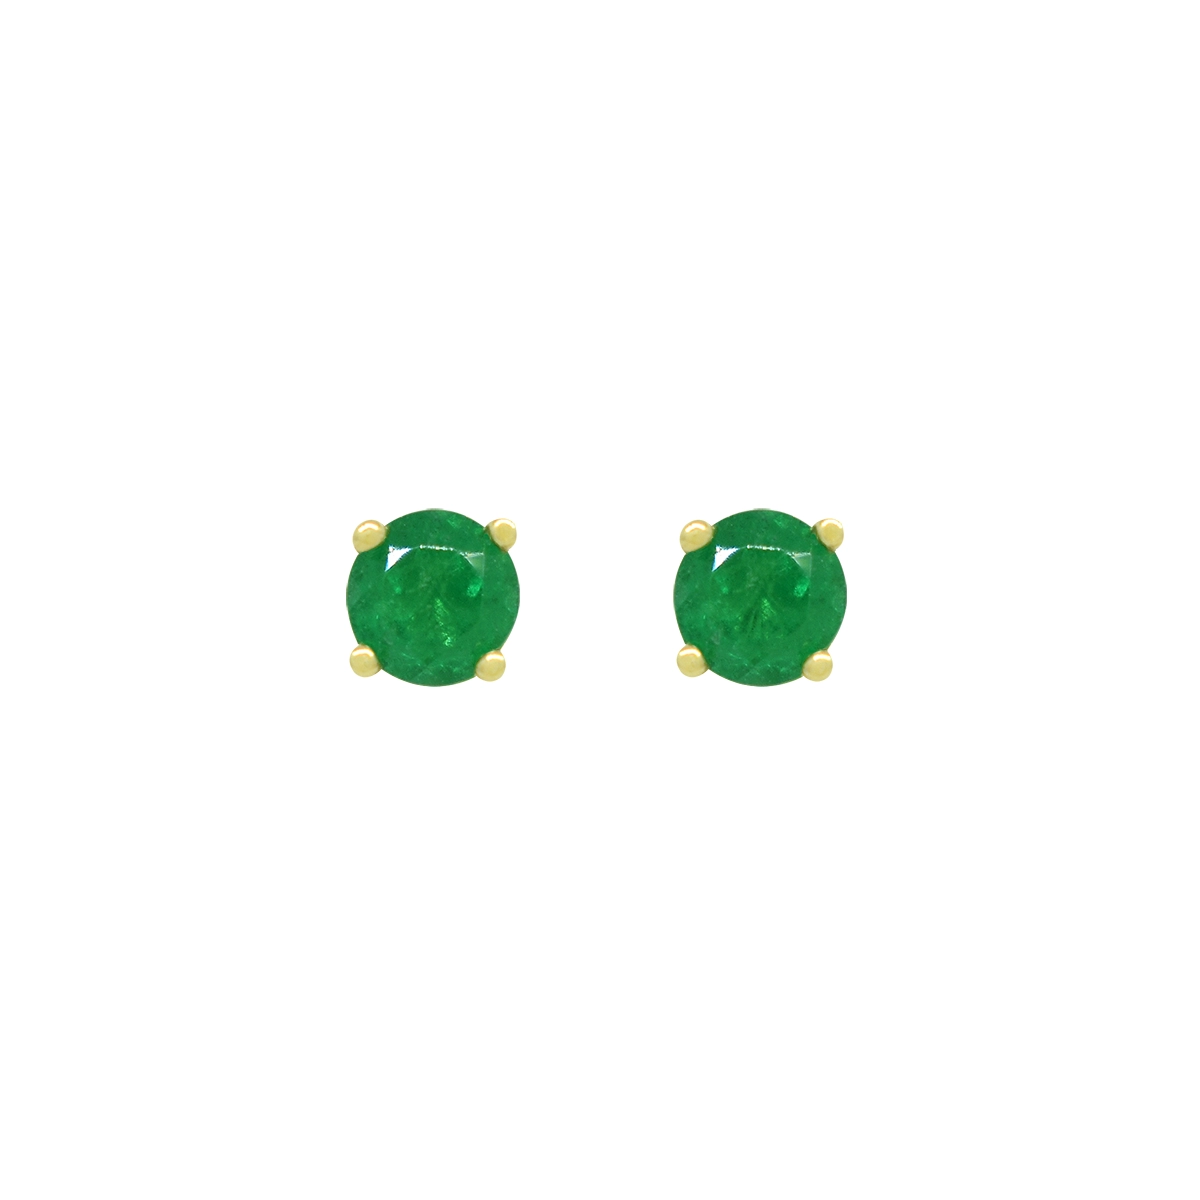 Small Emerald Stud Earrings in 18K Yellow Gold Classic 4-Prong Setting